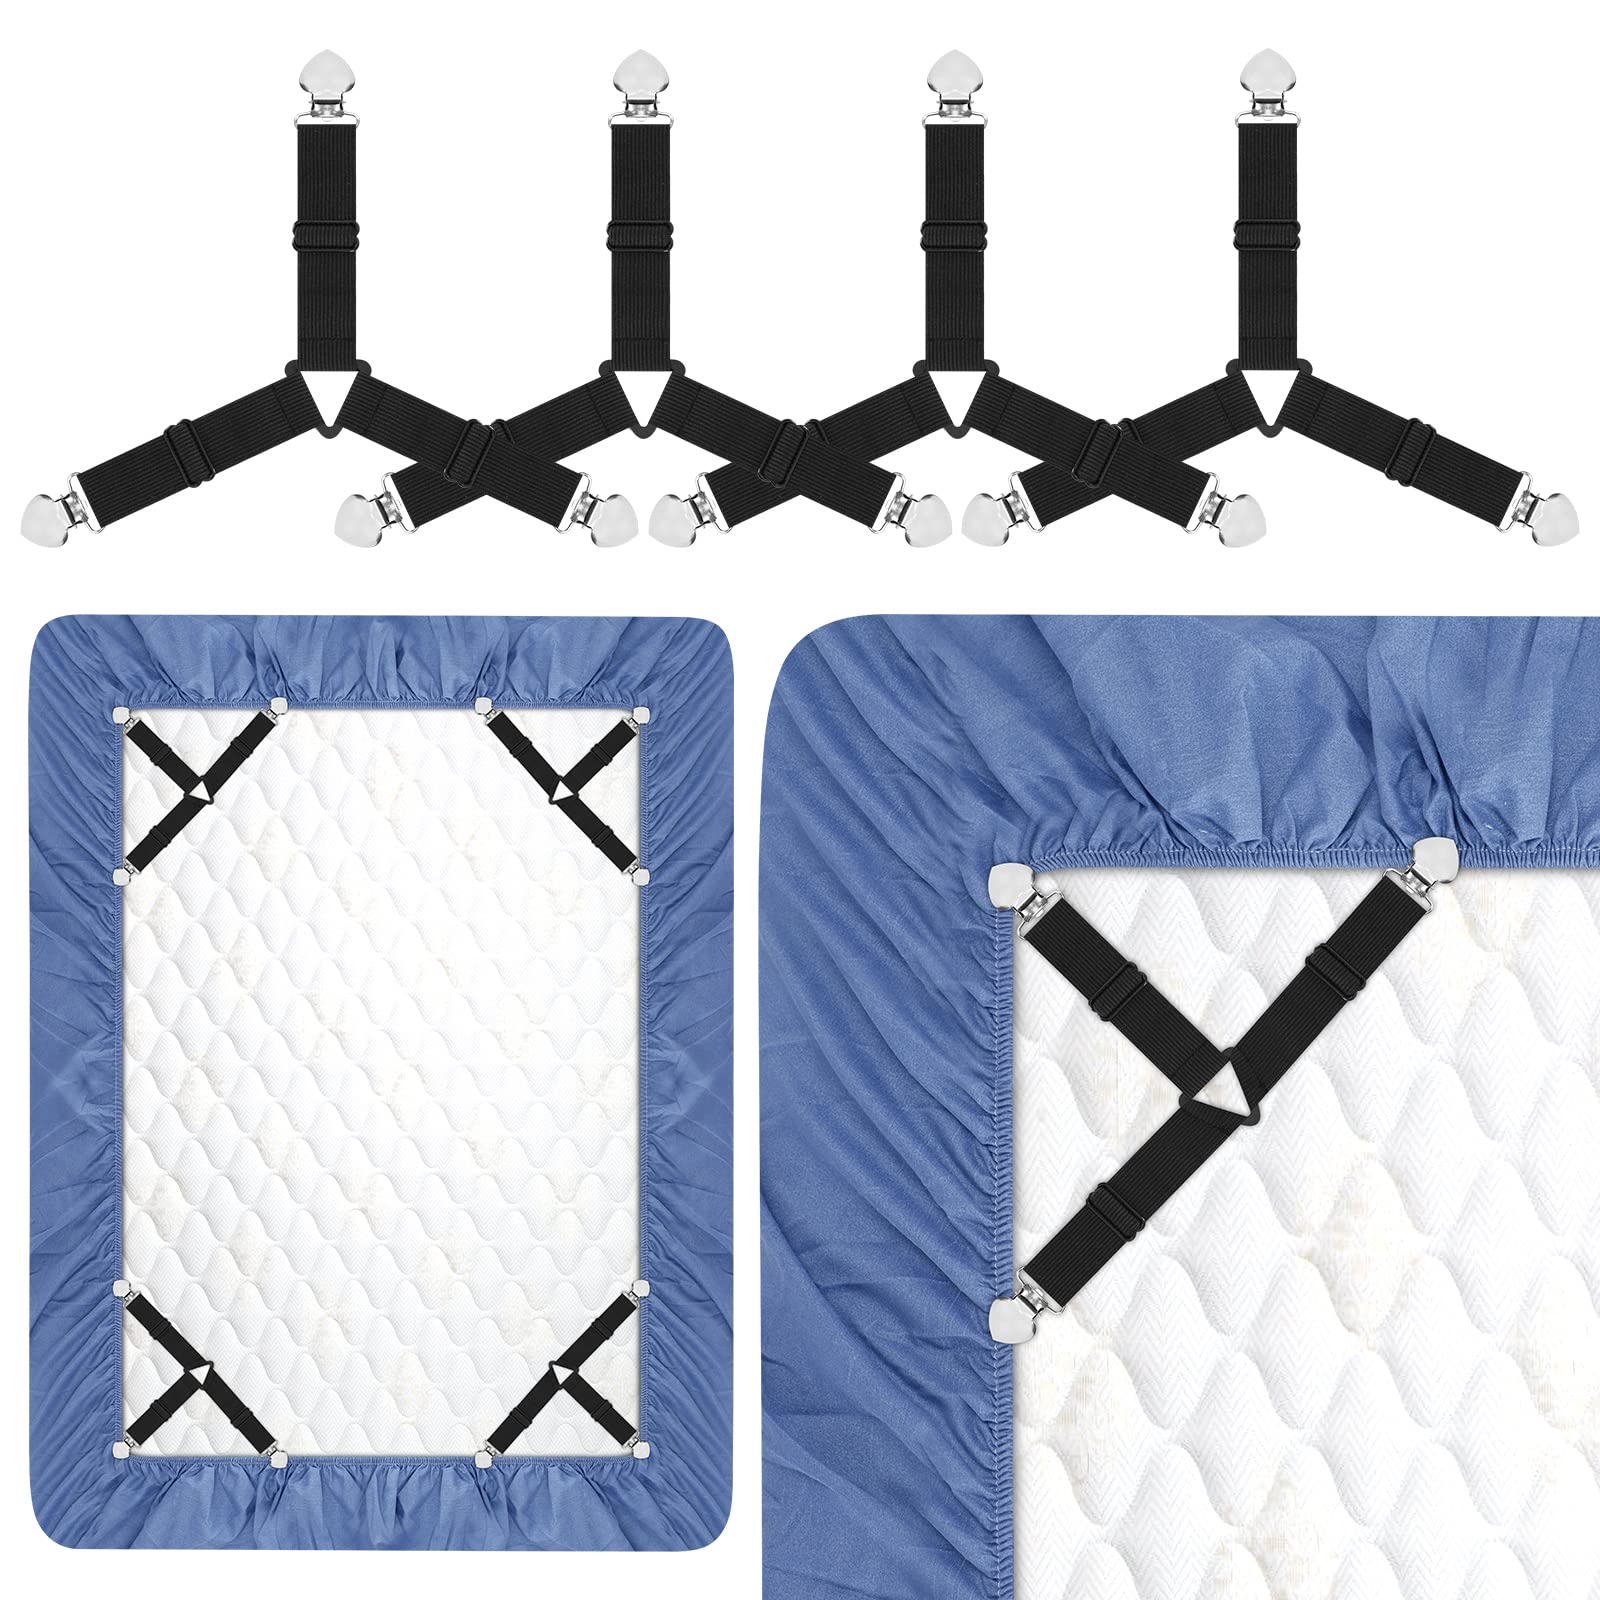 Book Cover Bed Sheet Holder Straps, Rareccy Adjustable Bed Sheet Fastener and Triangle Elastic Mattress Sheet Clips Suspenders Grippers Fasteners Heavy Duty Keeping Sheets Place for Bedding Mattress (4 PCS)